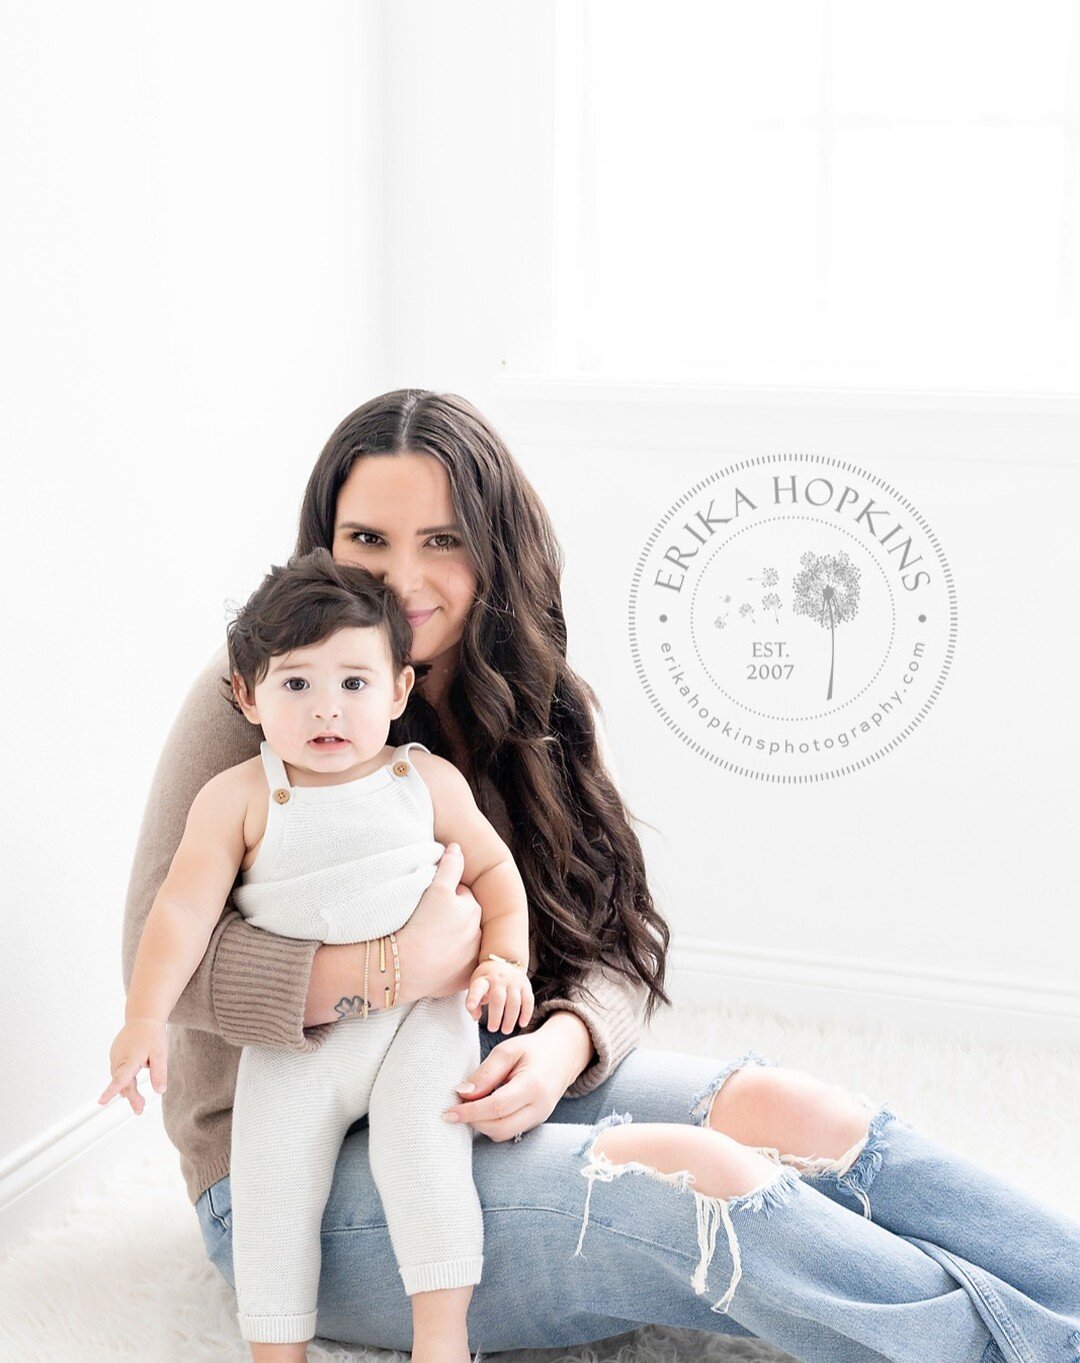 🎉📸 1st Birthday Studio Portraits 📸🎈

Step into our all-white, natural light studio and immerse yourself in a world of simple, clean, and elegant feels. Neutrals set the tone, highlighting the star of the show &ndash; a happy little boy who's turn